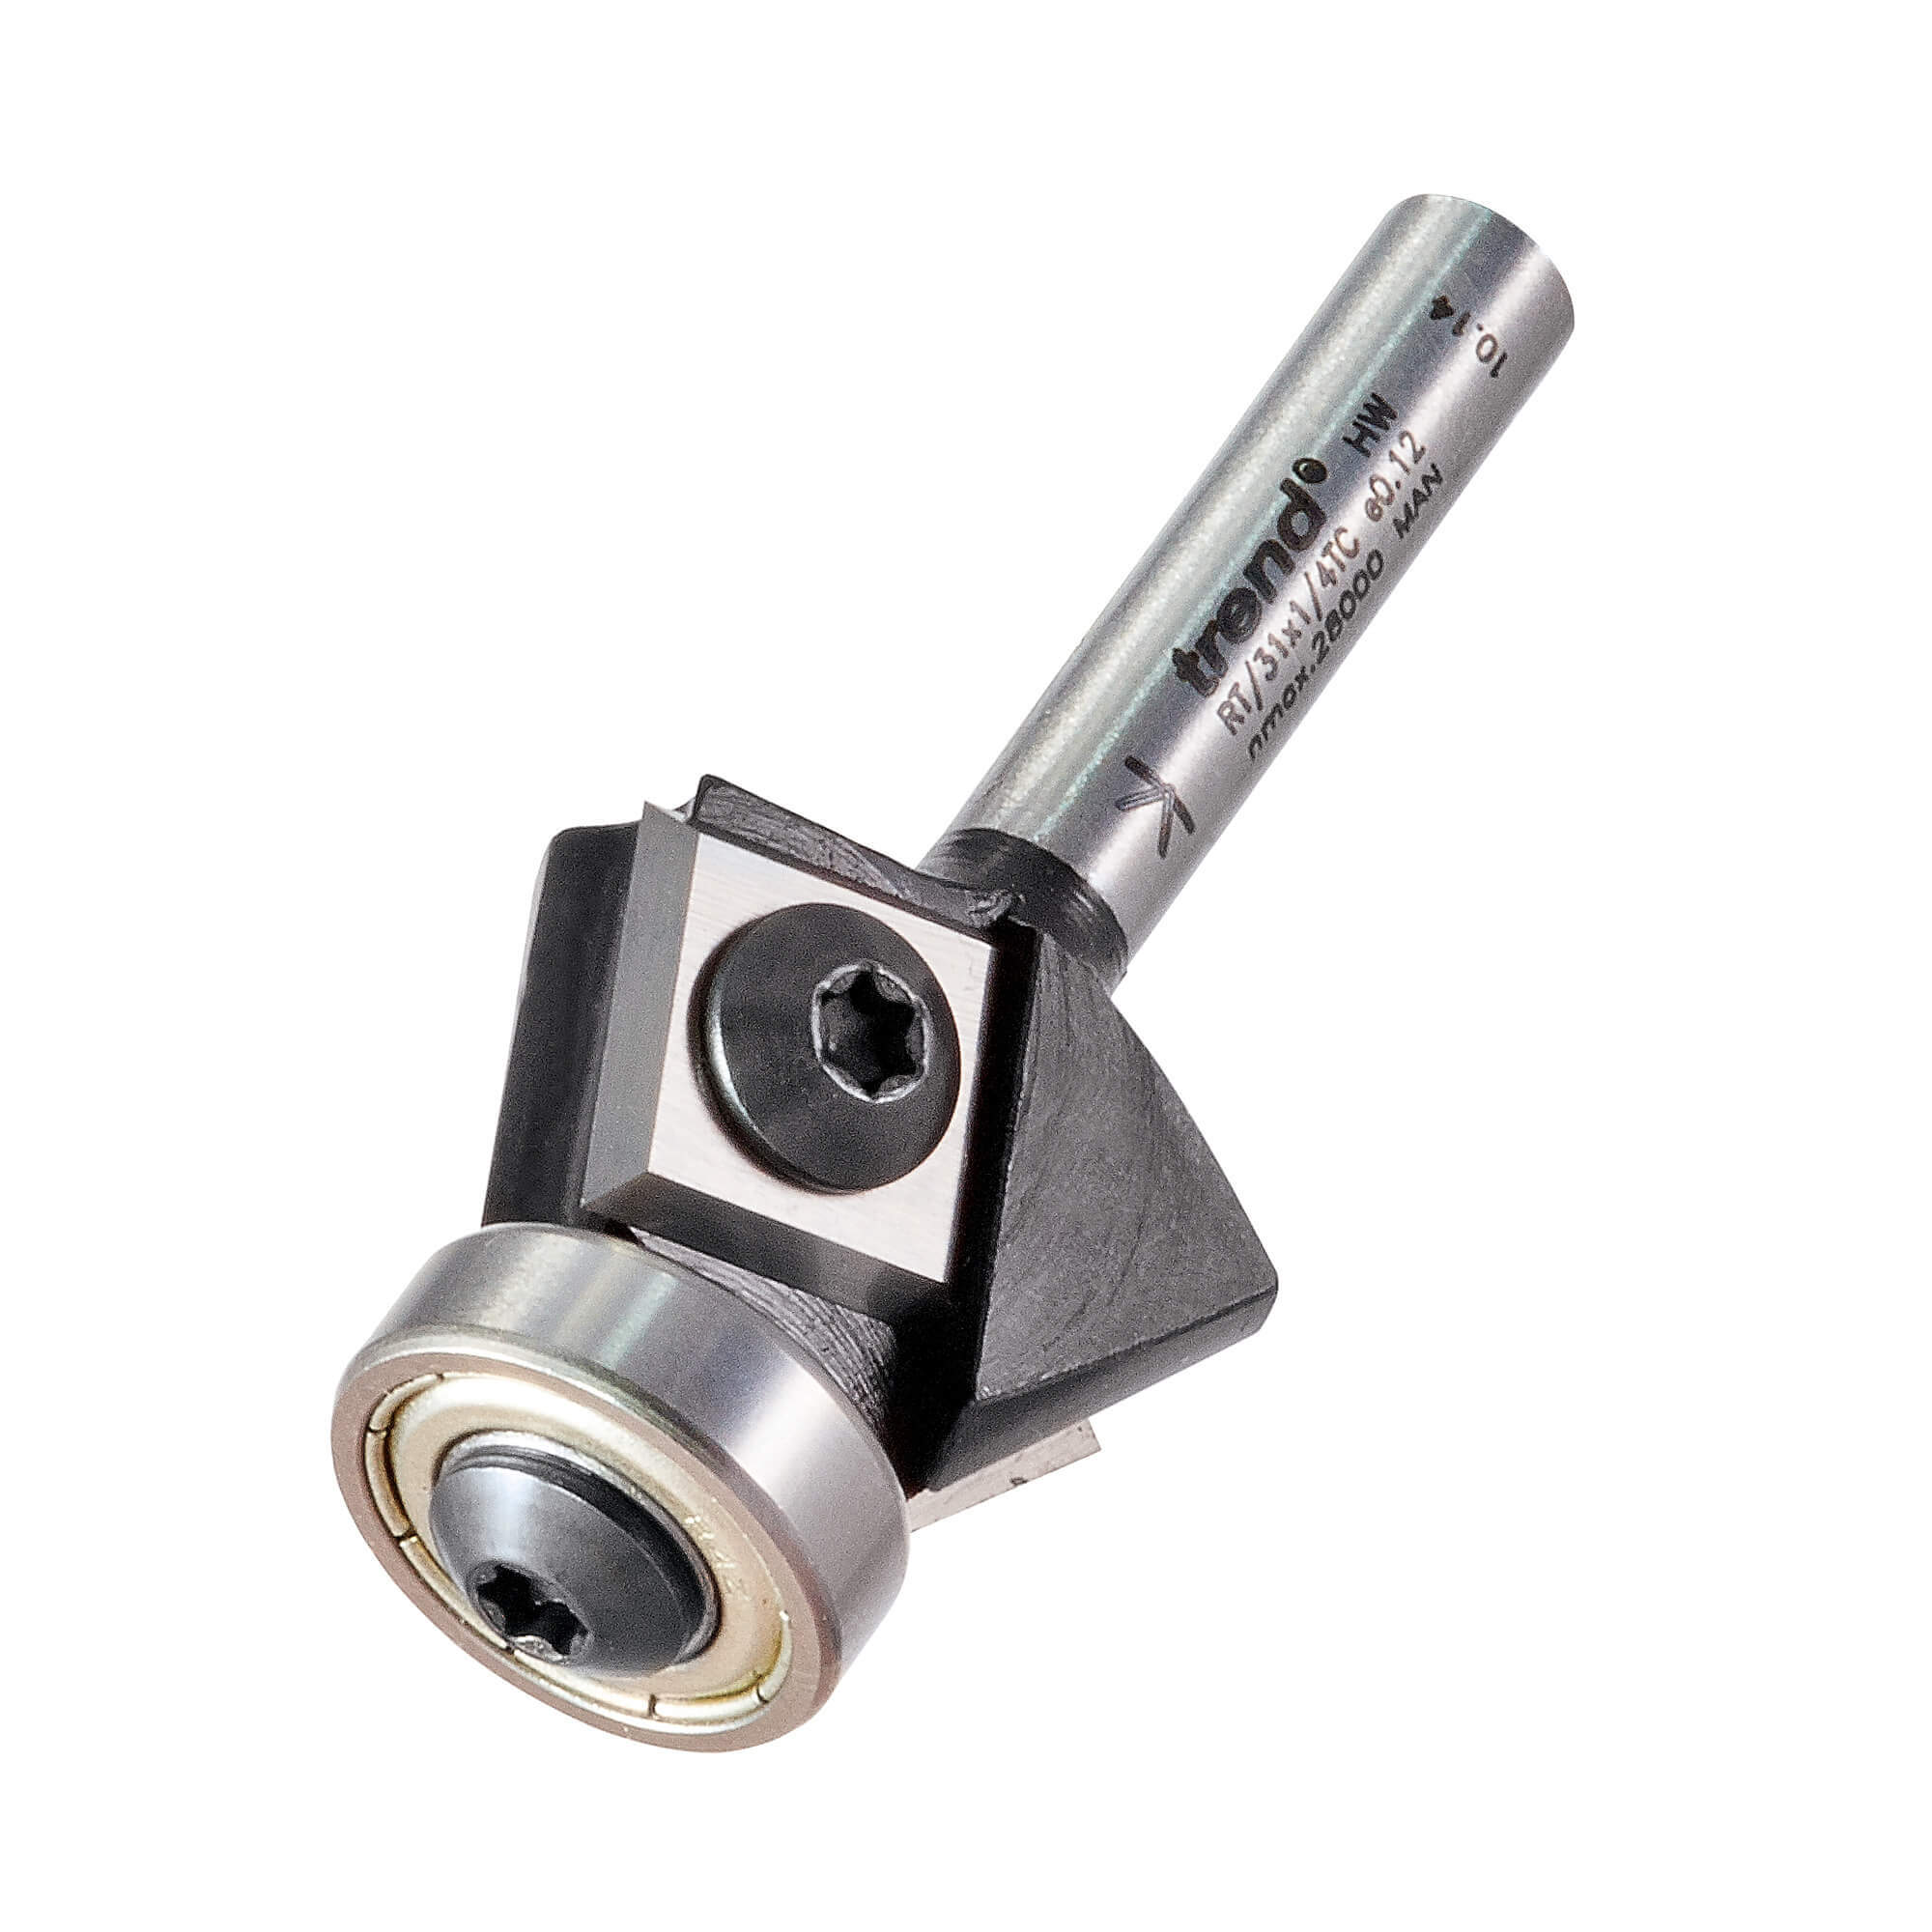 Image of Trend Rotatip Bevel Trimmer Bearing Guided Router Cutter 24mm 12mm 1/4"